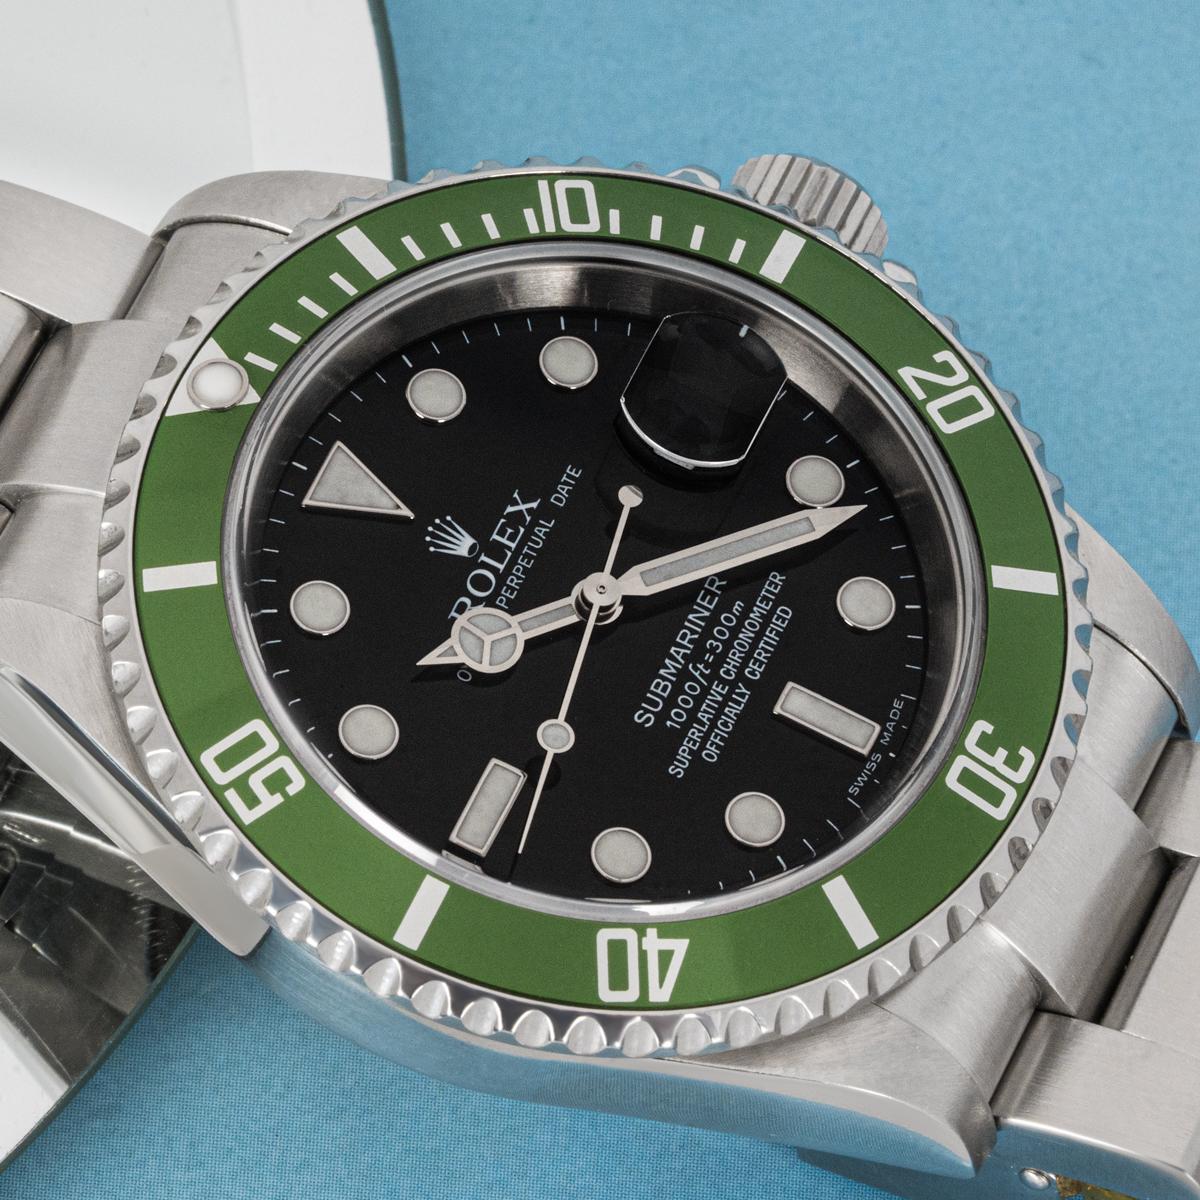 A 40mm Submariner Kermit in steel by Rolex. Features a black dial with applied hour markers and a green unidirectional rotatable bezel set with 60-minute graduations. Fitted with sapphire crystal, a self-winding automatic movement and an Oyster